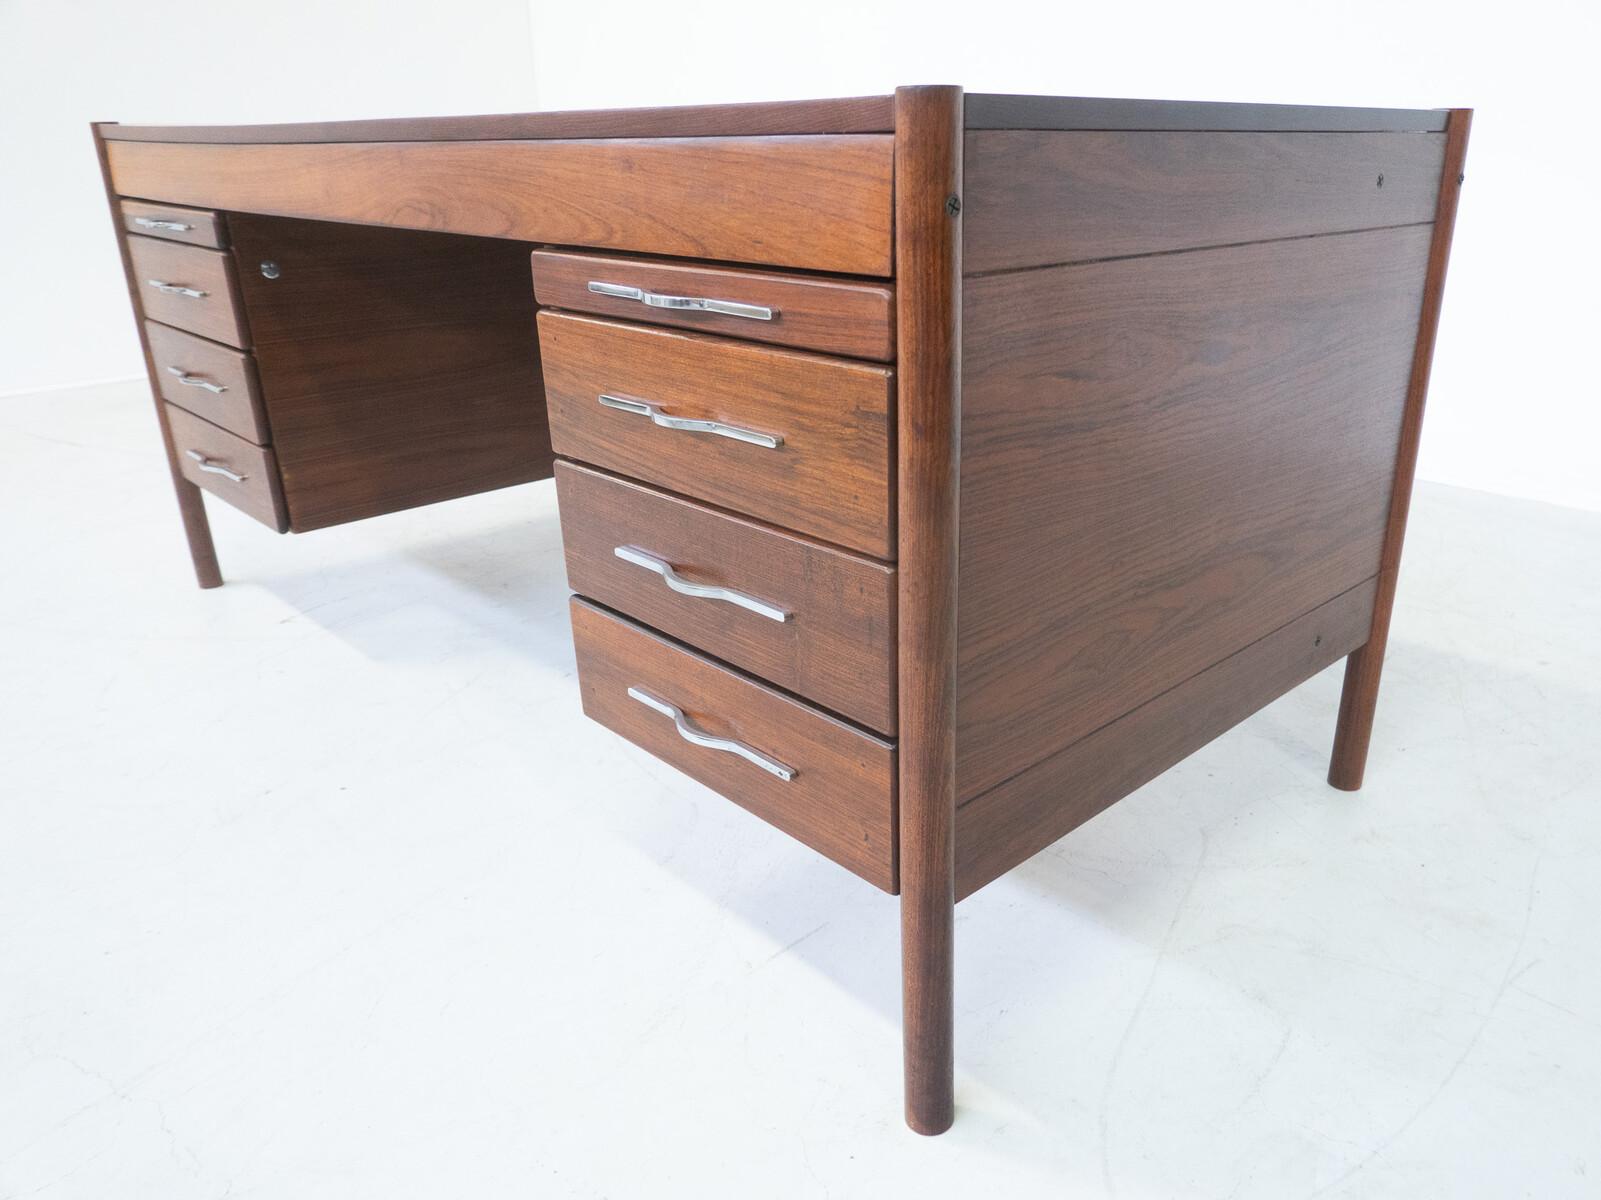 Mid-20th Century Mid-Century Modern Wooden Desk by Jean Gillon, Brazil, 1960s For Sale